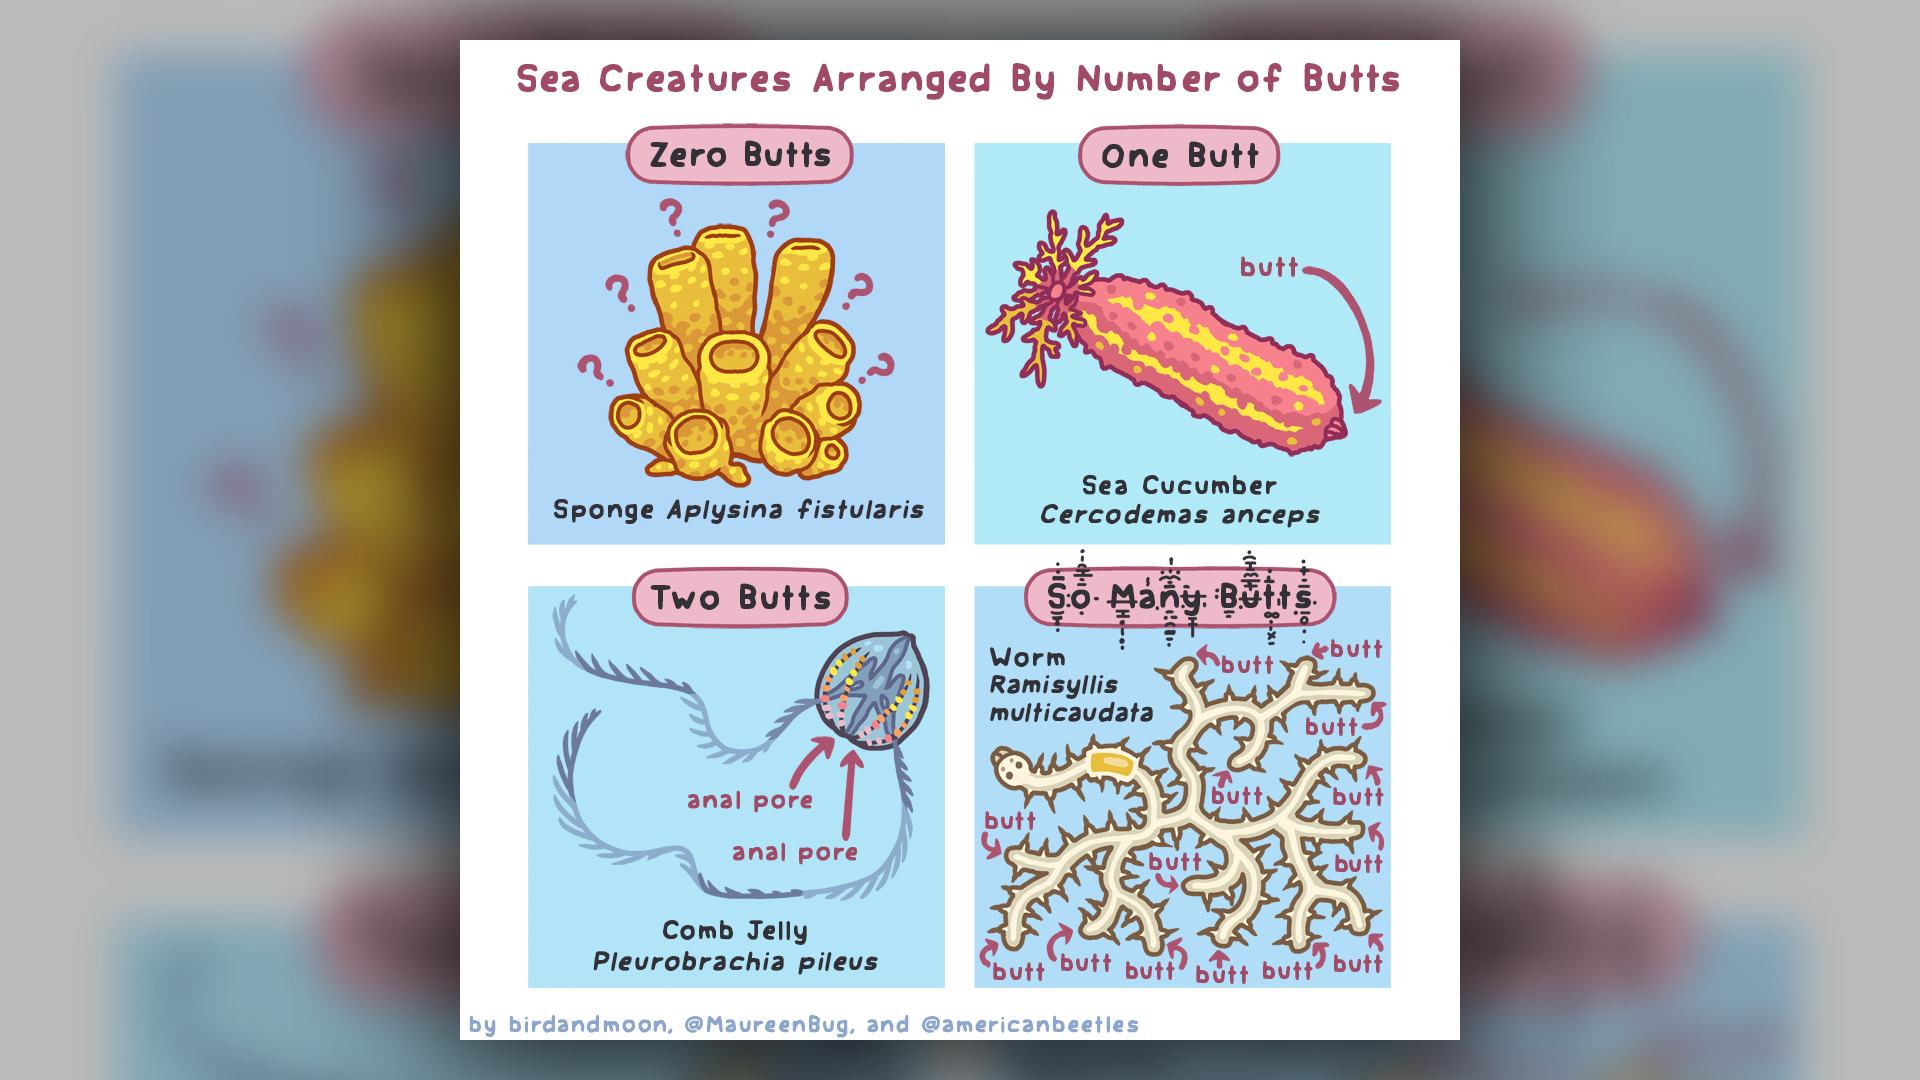 A four-panel comic describes diversity in invertebrate butts.